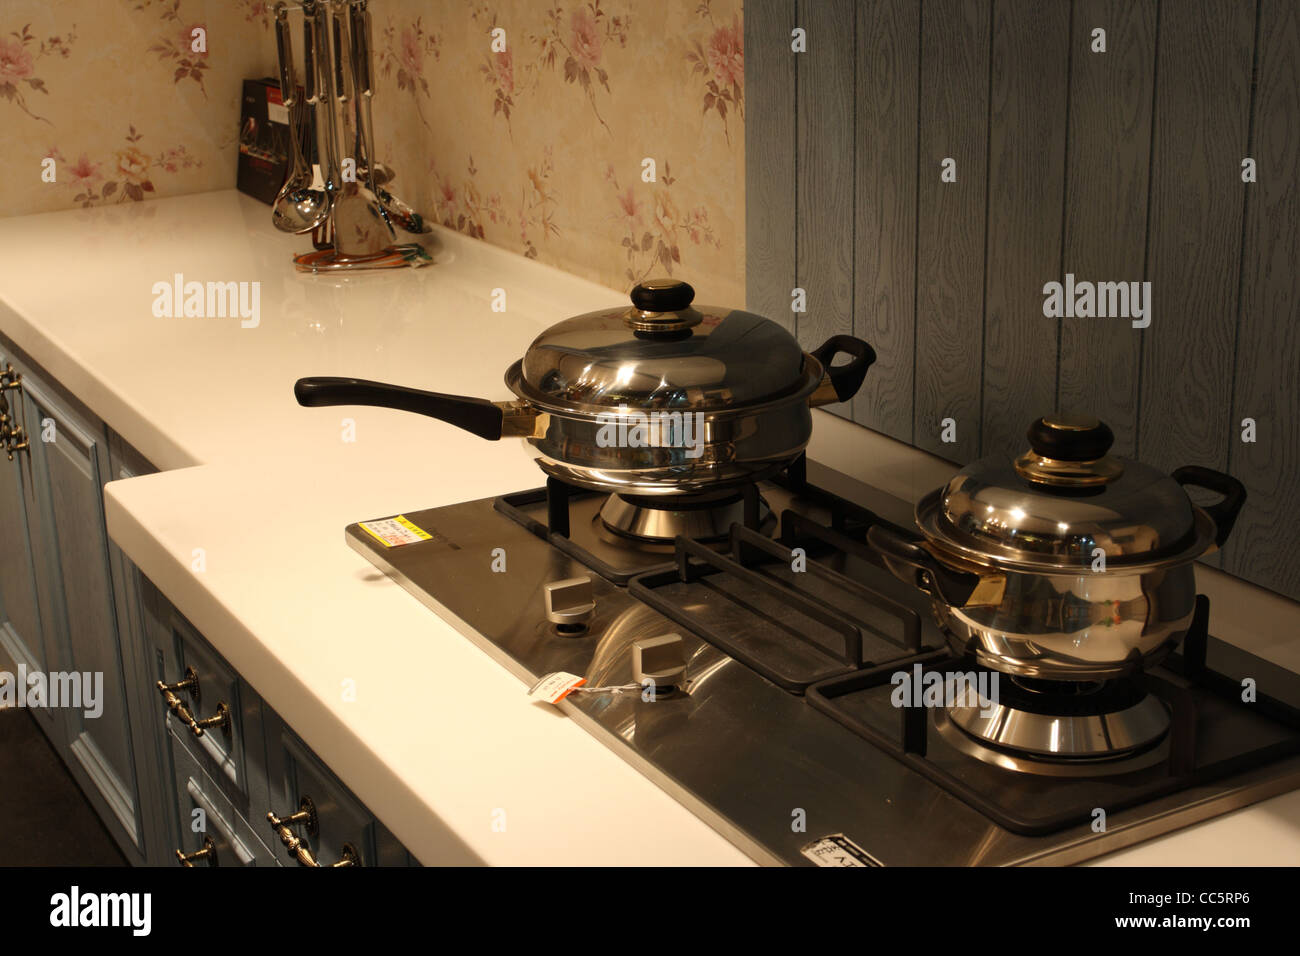 Boiler and frying pan on stove in kitechen Stock Photo